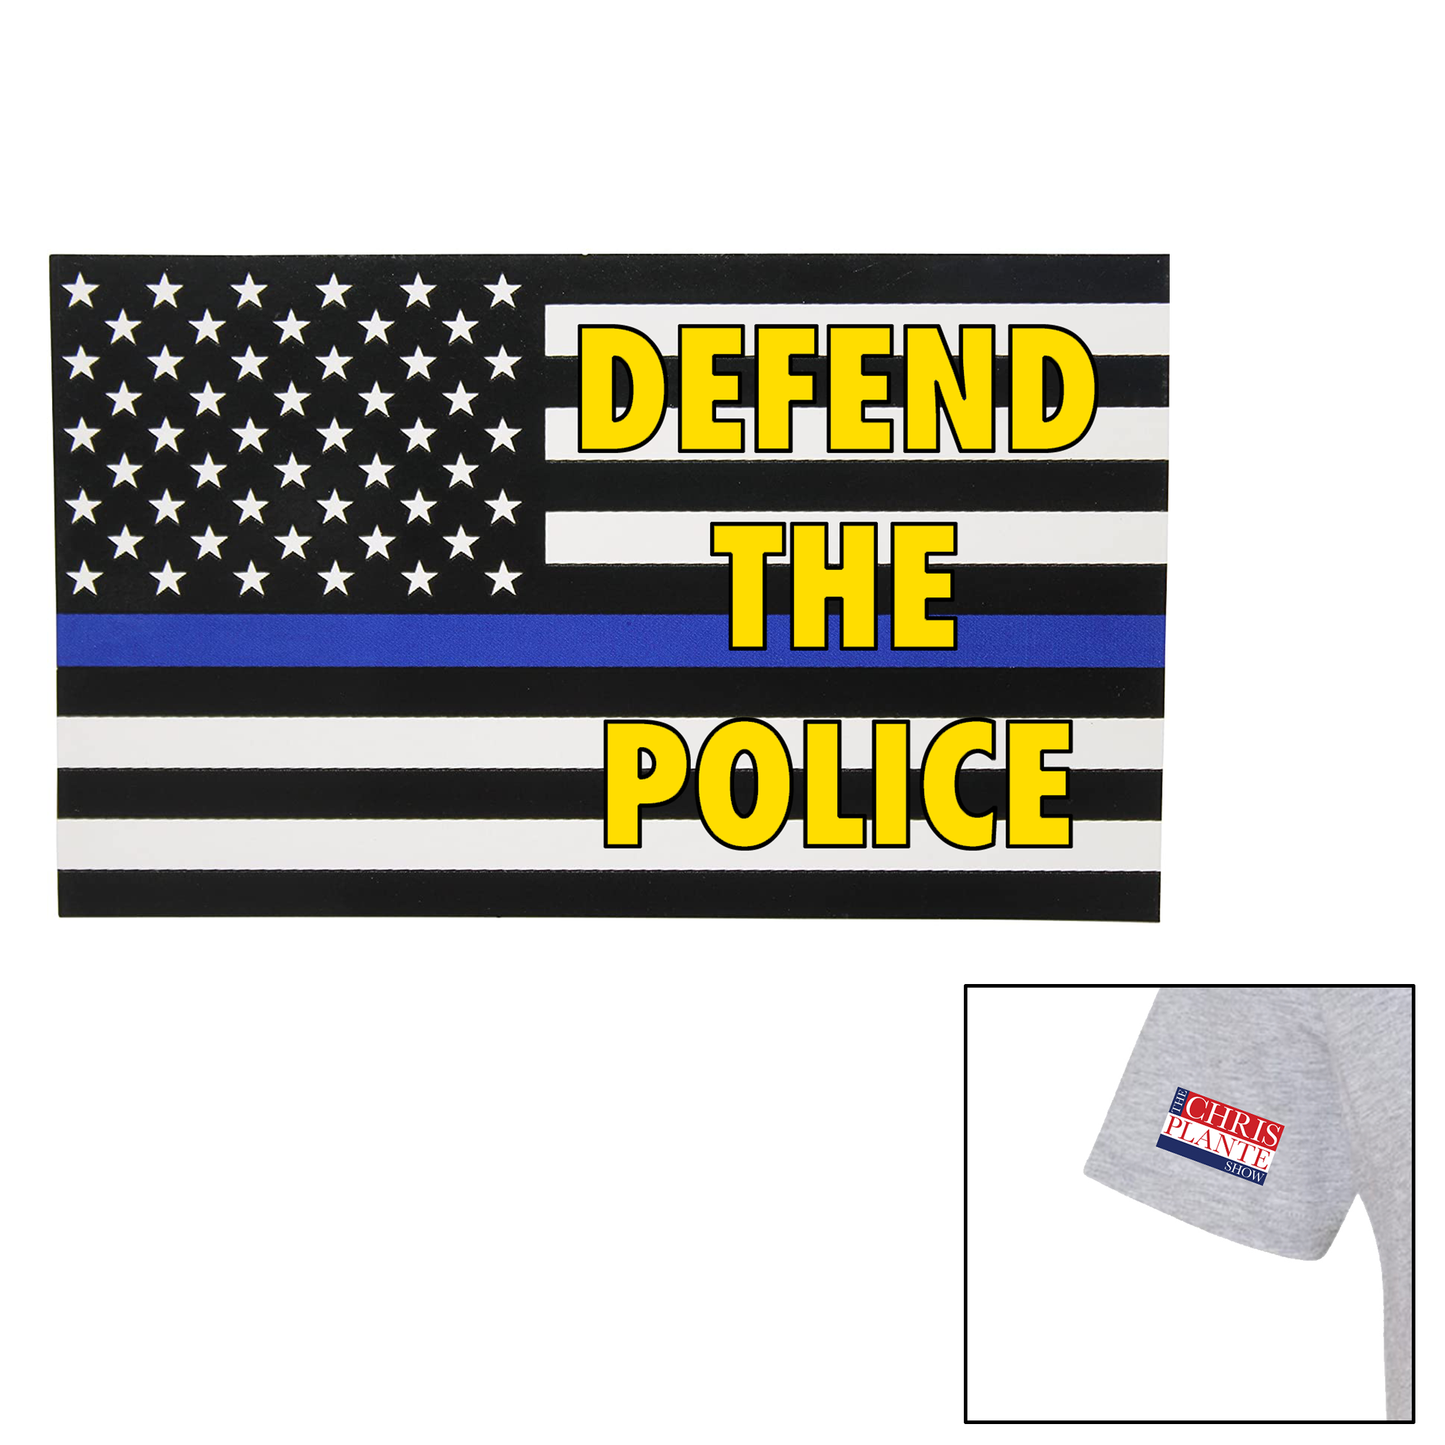 Defend the Police T-Shirt